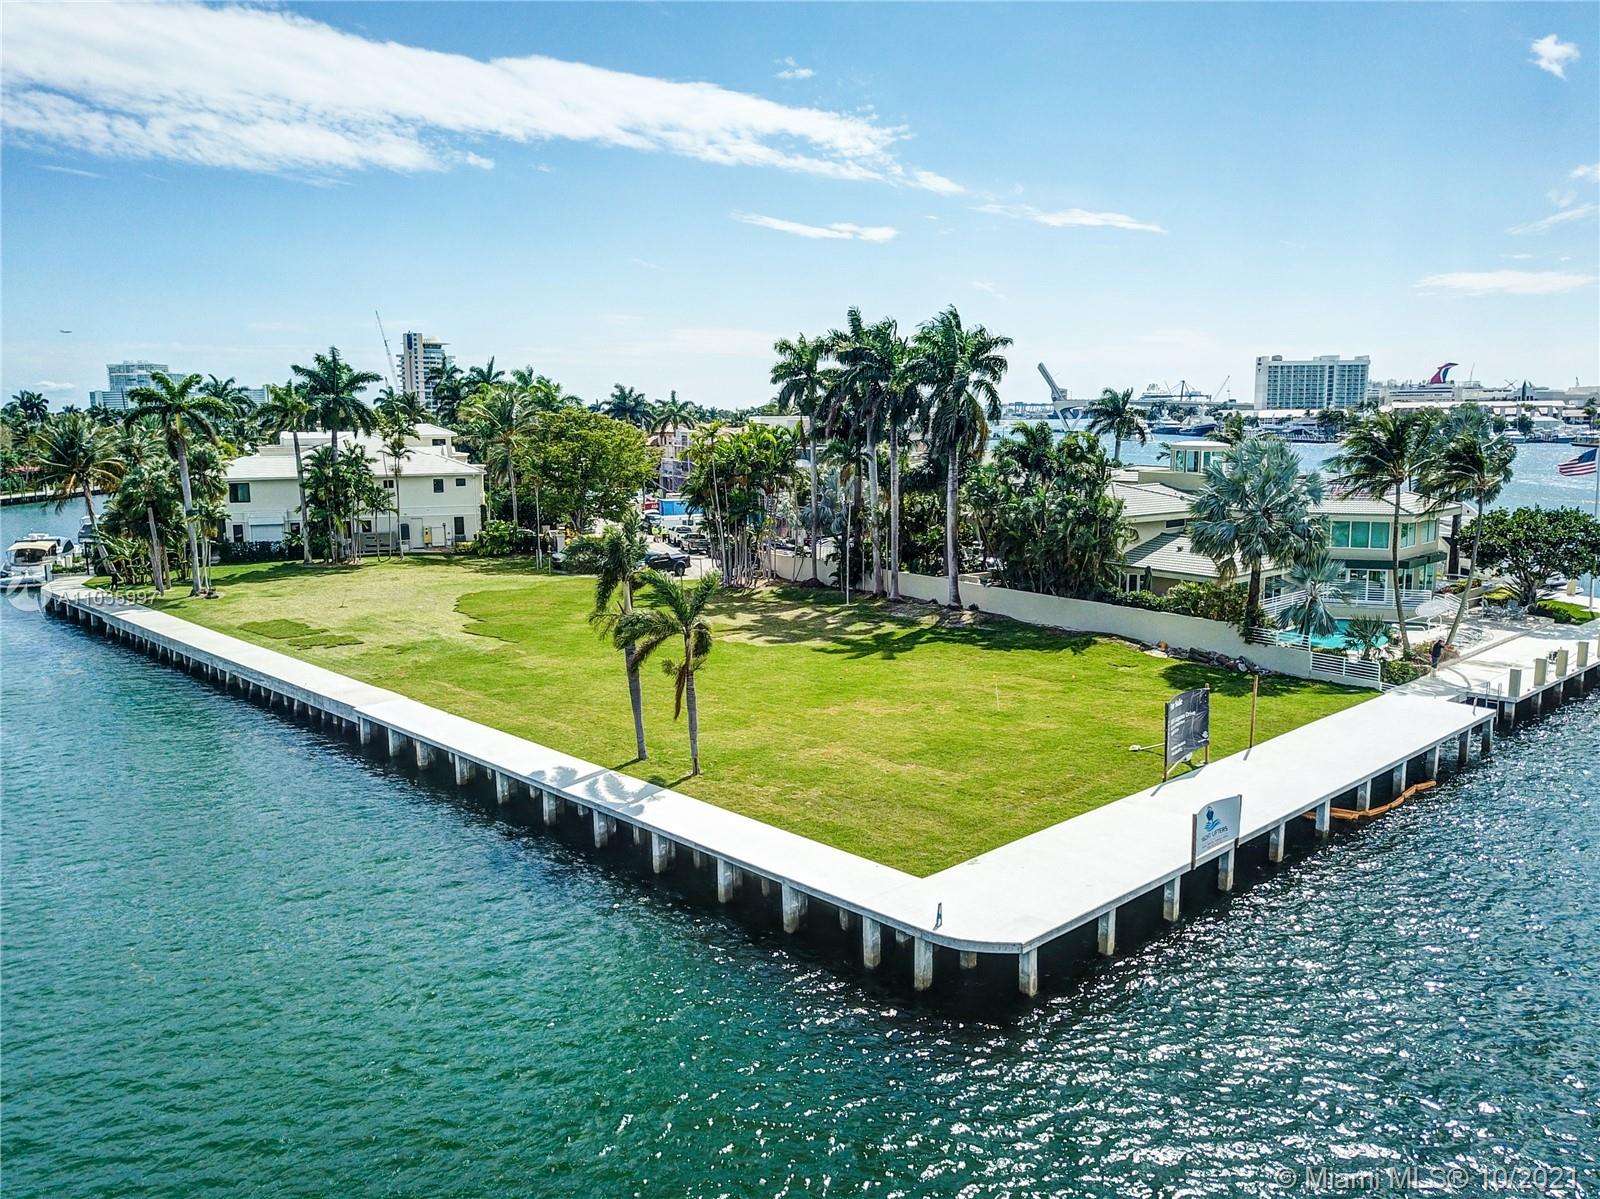 Spectacular Point lot where the intracoastal meets the New River offering panoramic open vistas. Boasting 390+ of water frontage, accommodating large and multi yacht dockage truly just minutes from the ocean. New Seawall and new Dock. Unobstructed views extend far and wide toward the long westward expanse up the New River to downtown Ft Lauderdale. Residents of gated Harbor Beach also have access to the private oceanfront beach club. This oversized lot (29,823 sq ft) located on a very quiet street is ready for a new home. Surrounding homes are in the 19M-25M range so you can easily build a dream home starting with this magnificent piece of property.